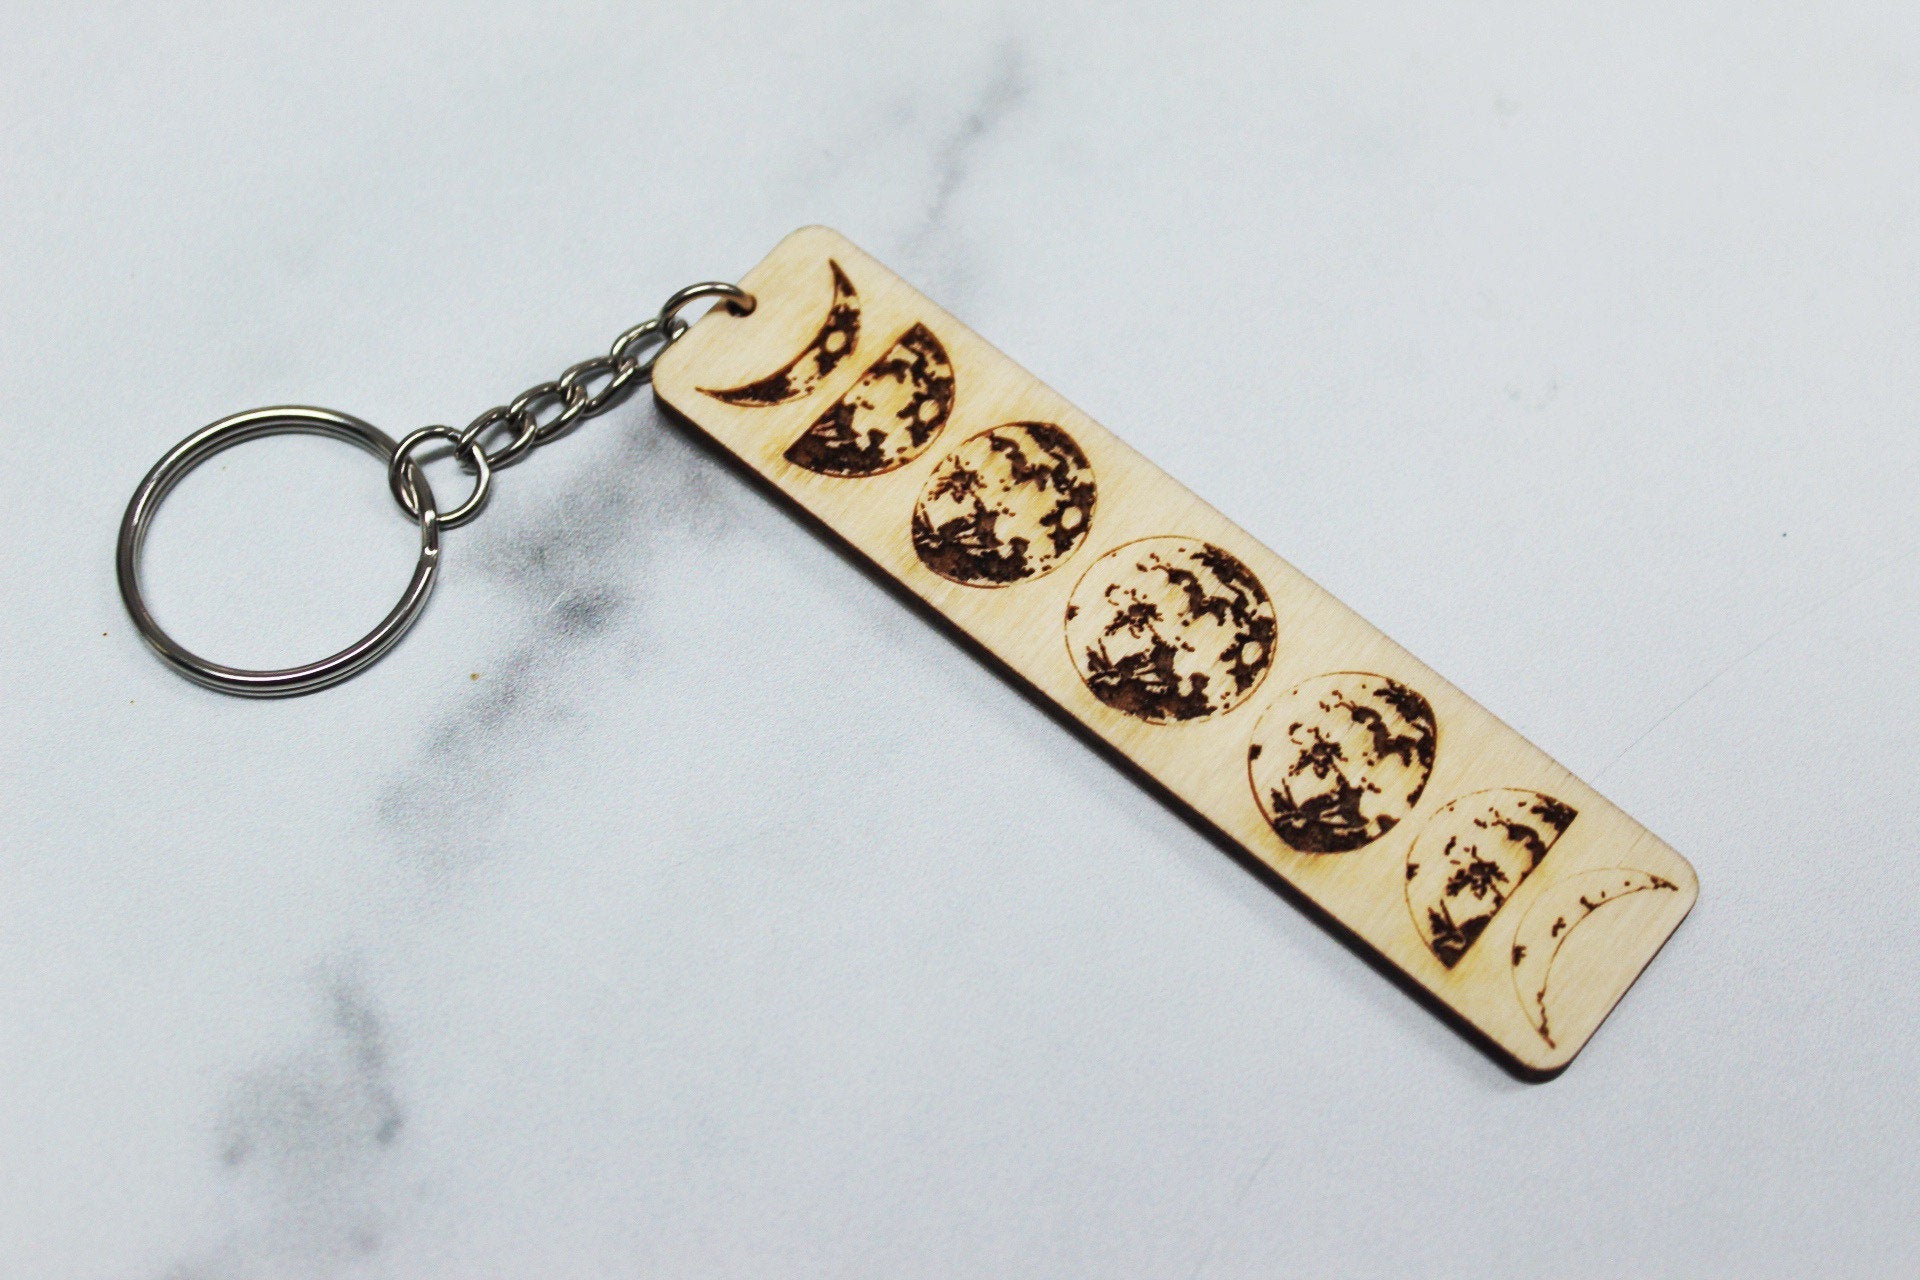 Wooden Moon Phase Lunar Keychain Gift For Her, Lunar Phase Moon Keychain Gift